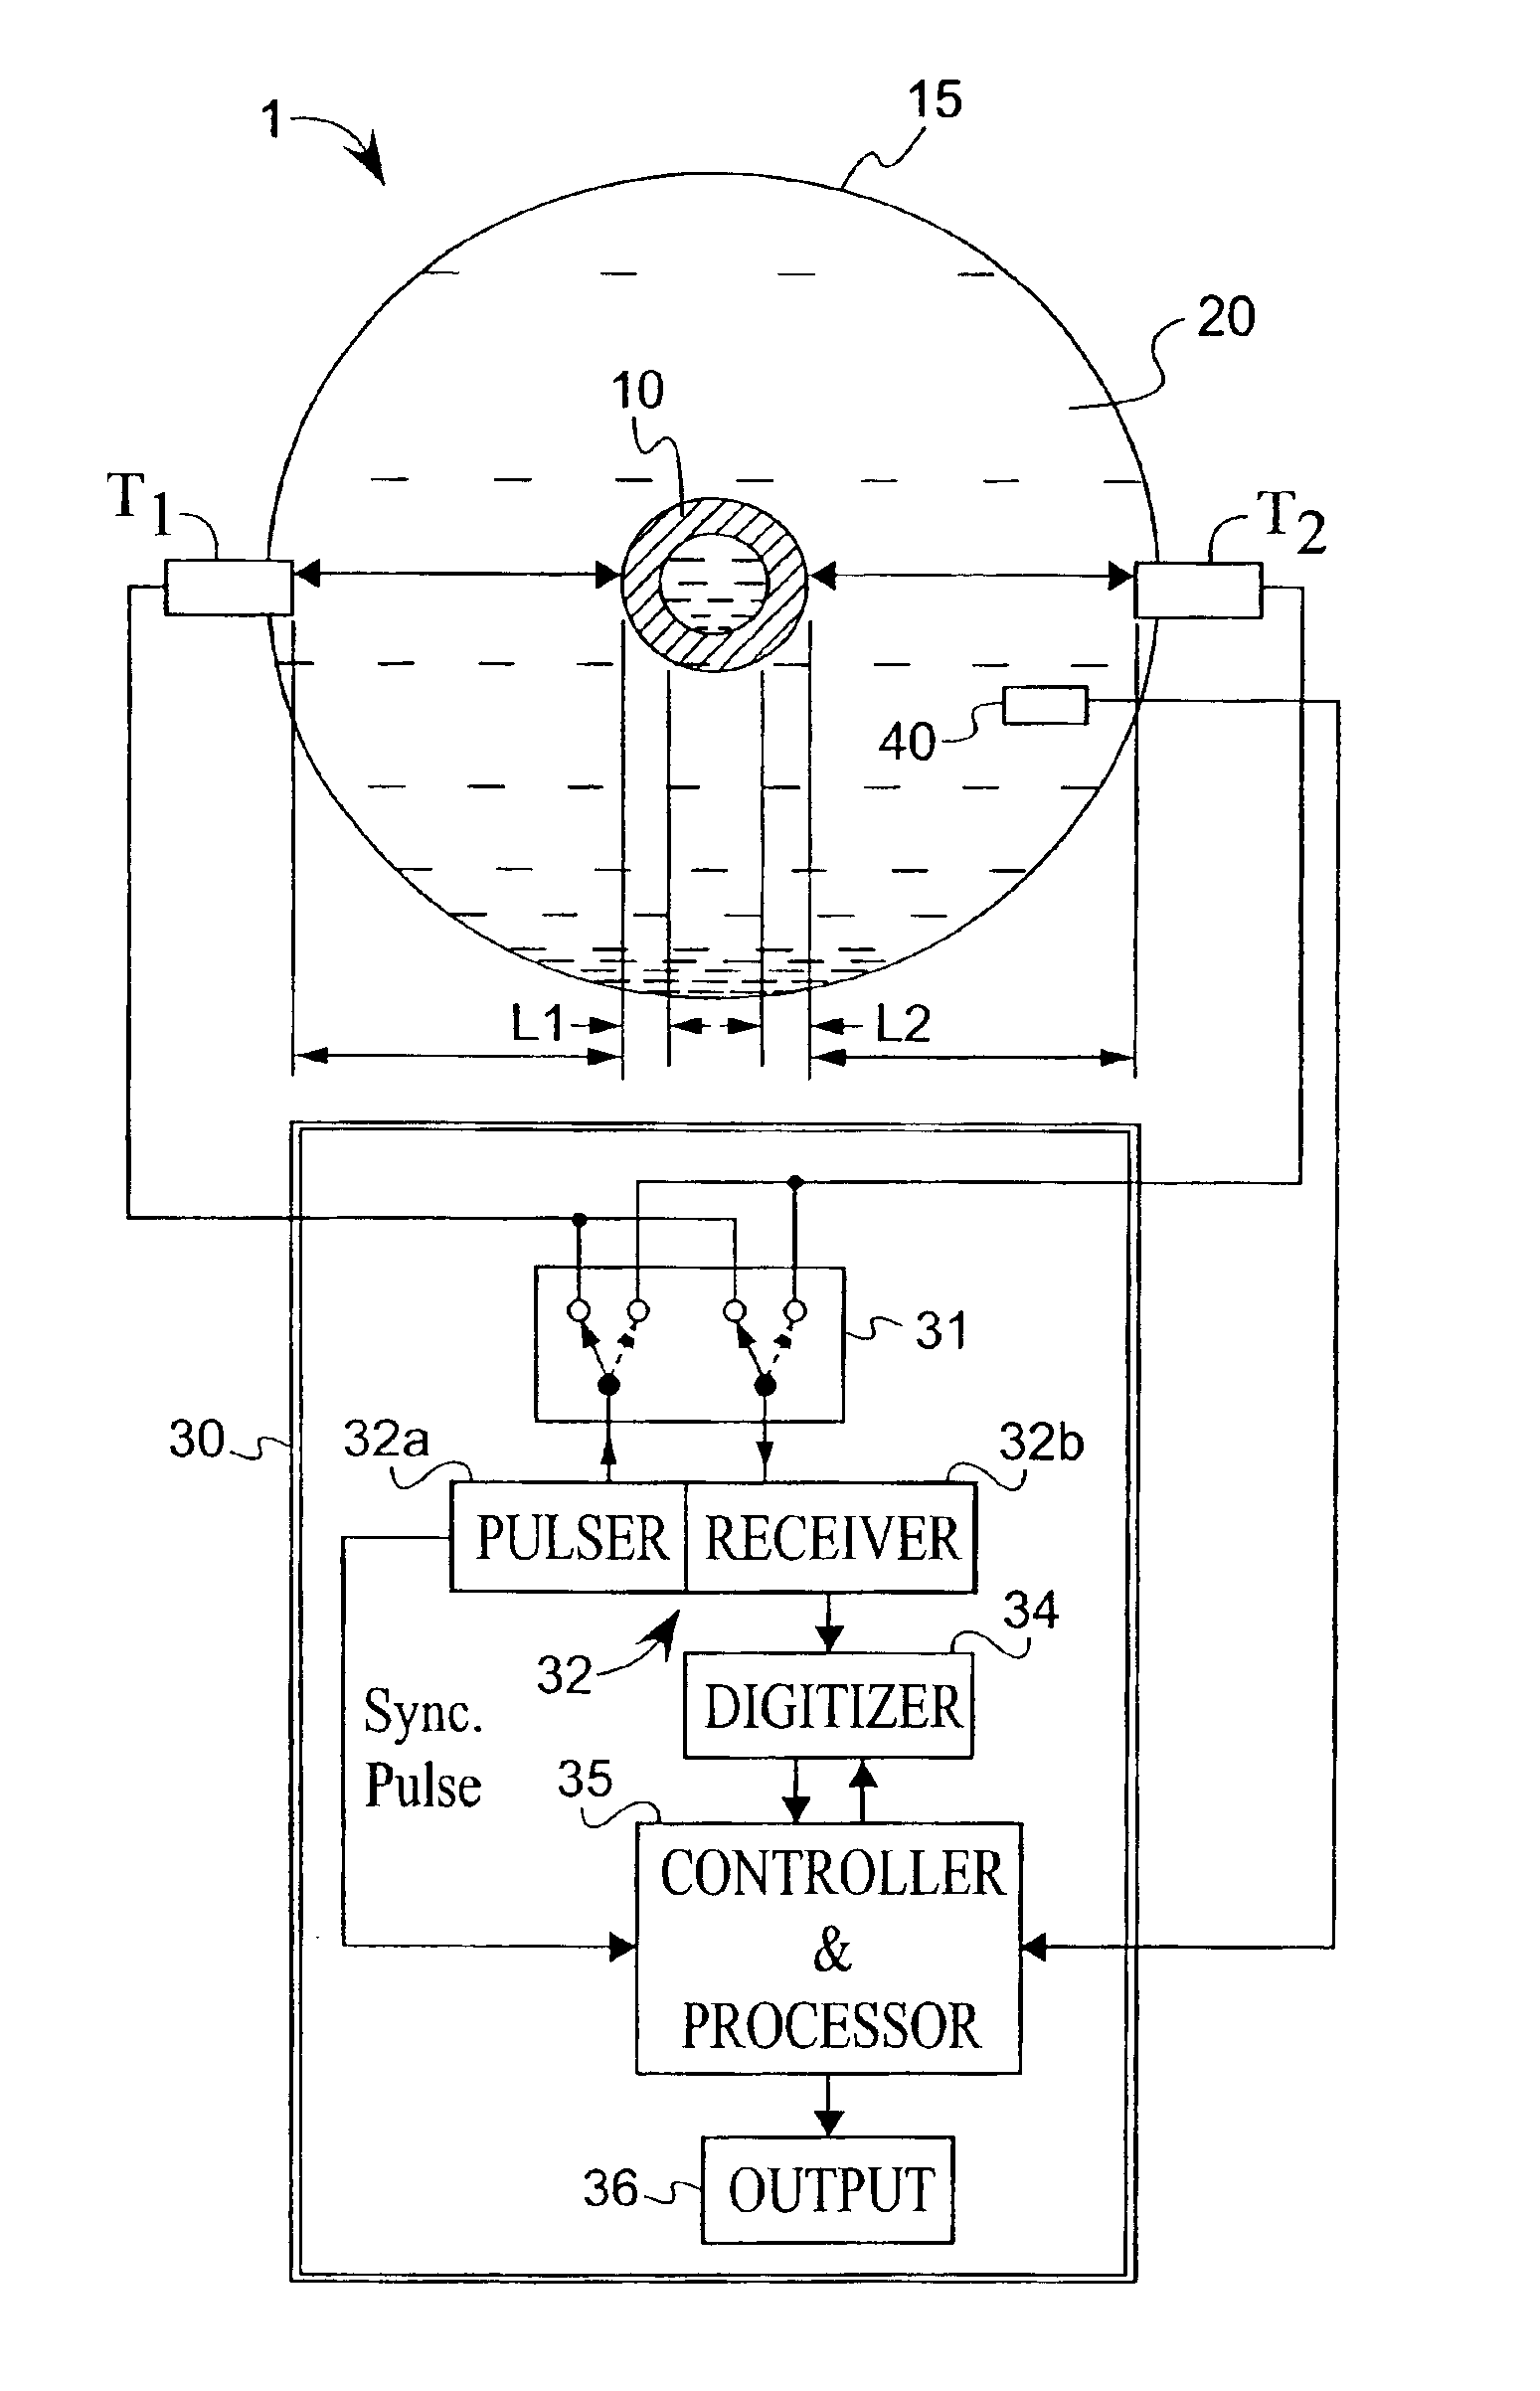 Method for determining the wall thickness and the speed of sound in a tube from reflected and transmitted ultrasound pulses